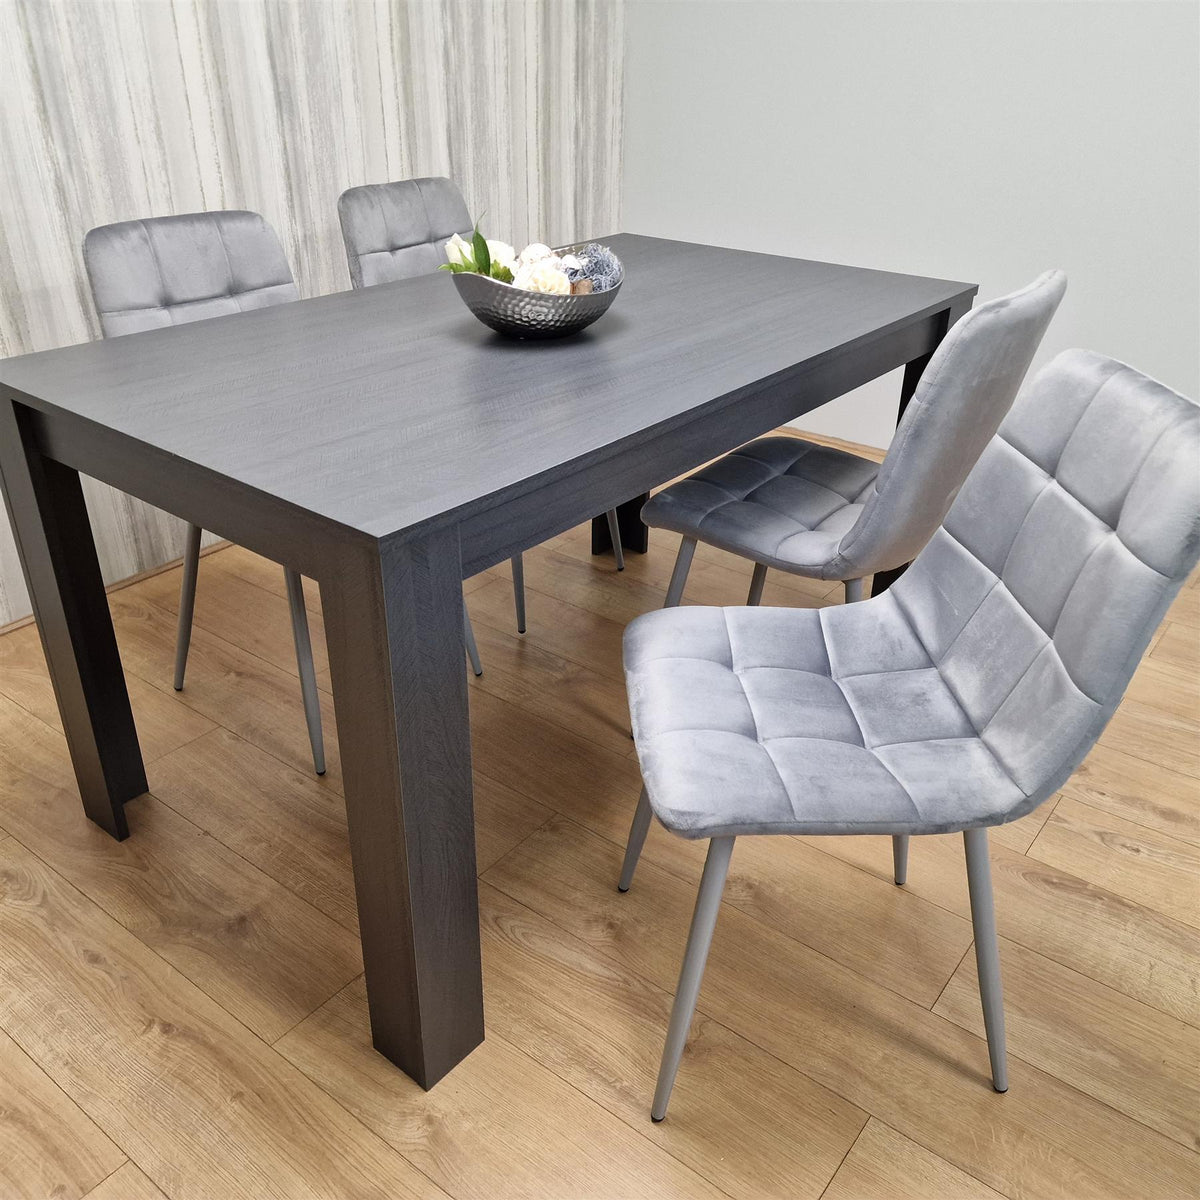 Dining Table Set with 4 Chairs Dining Room and Kitchen table set of 4